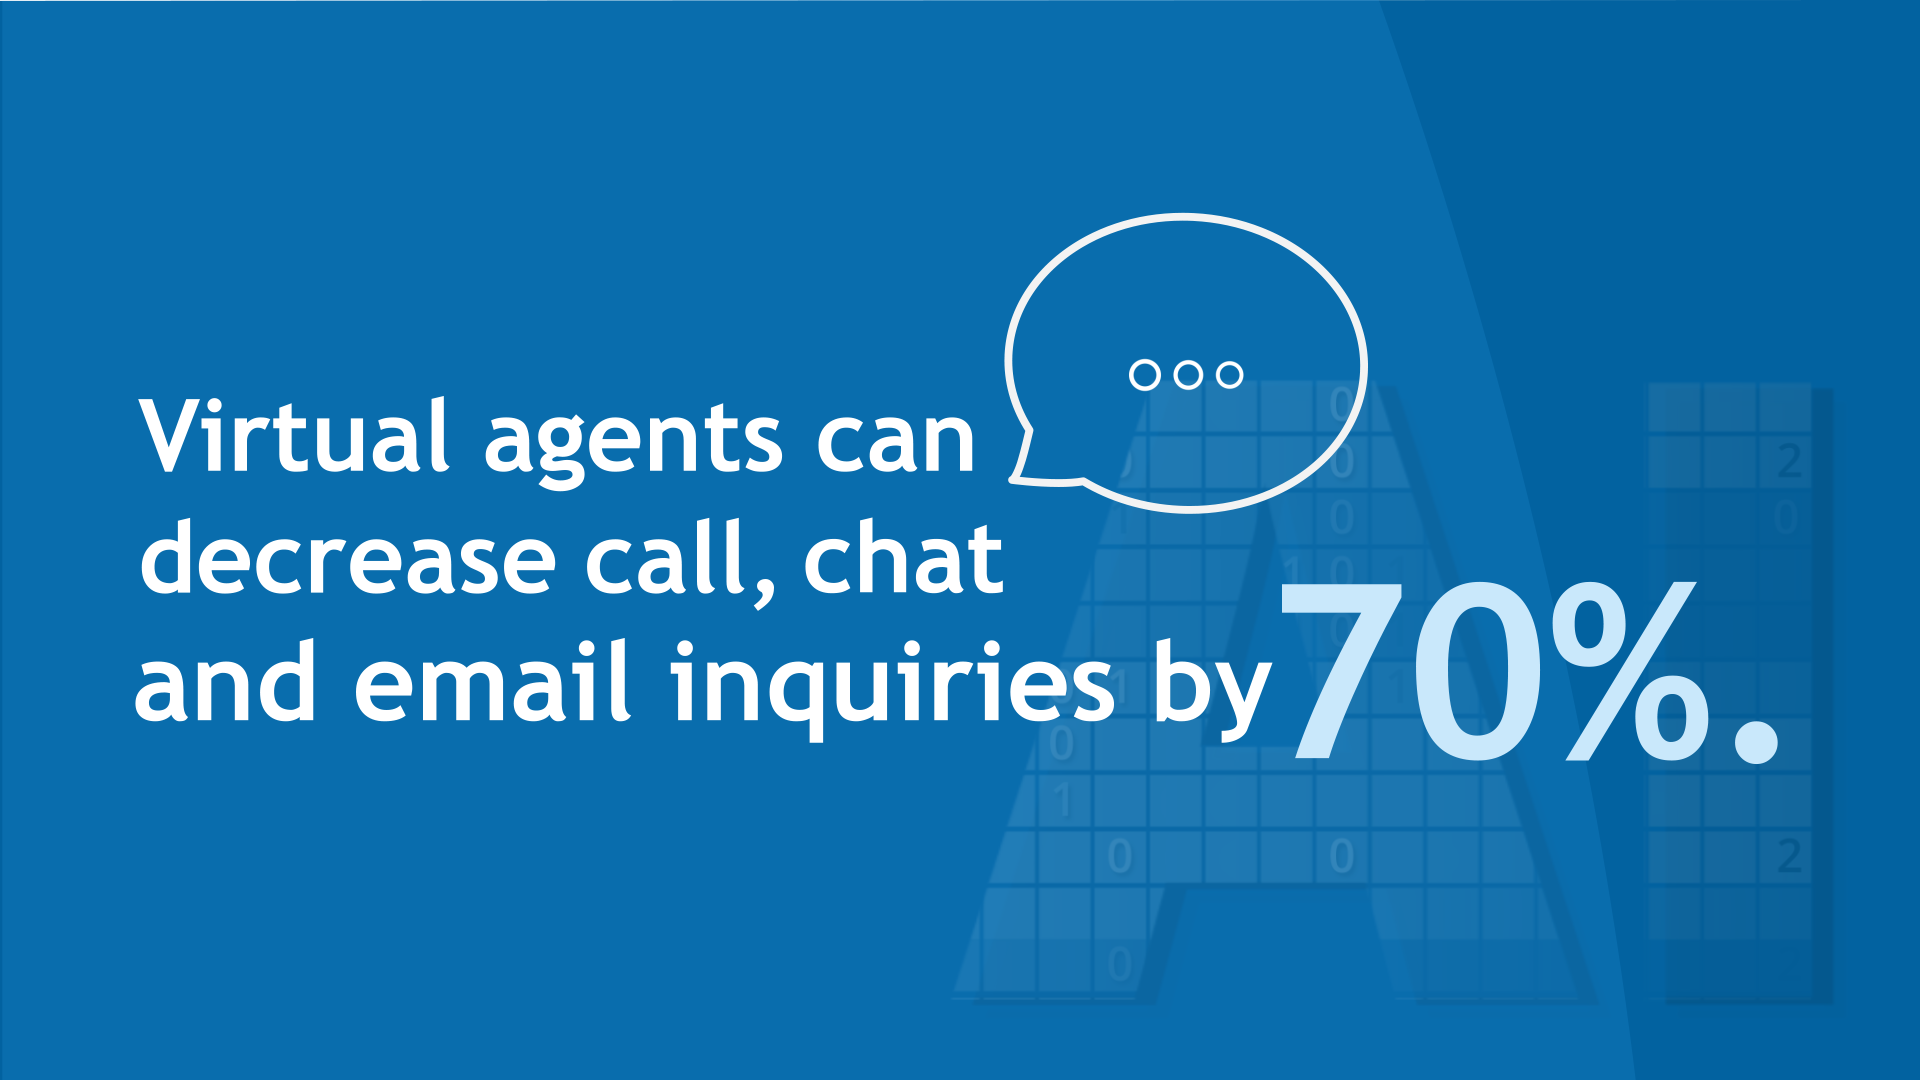 Virtual agents can decrease call, chat and email inquiries by 70 percent.